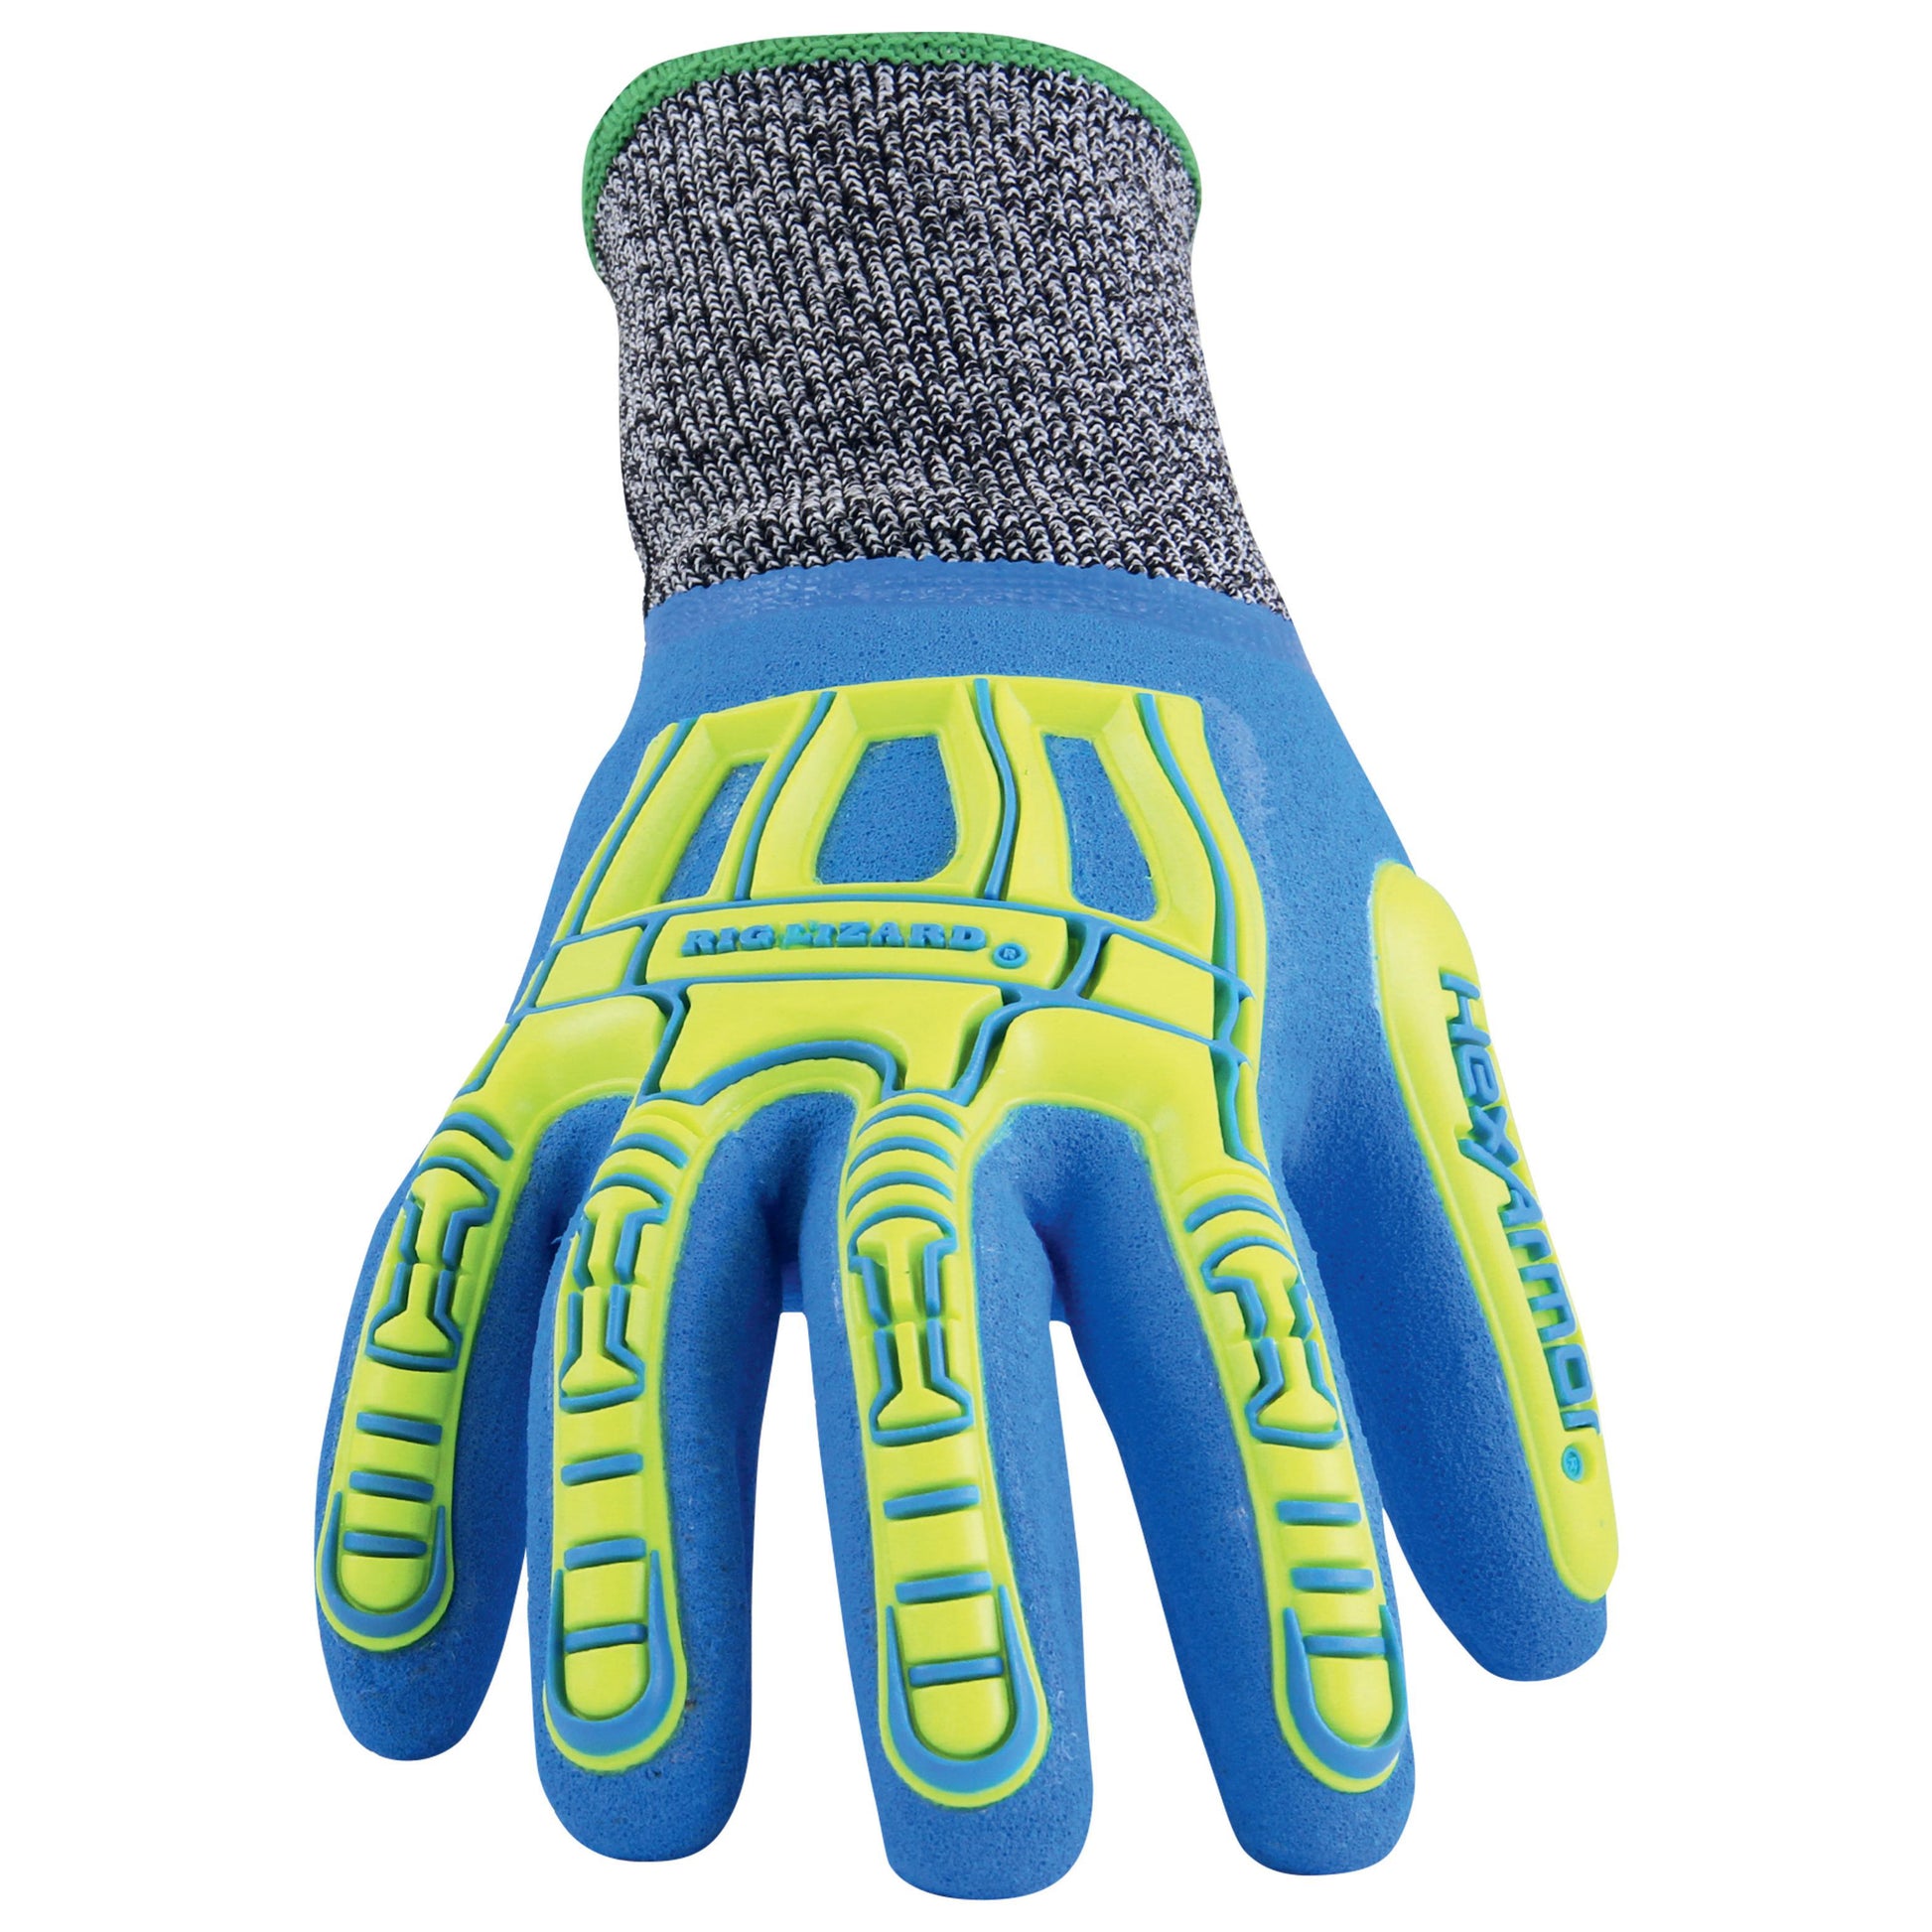 Hexarmor Ri-Lizard safety gloves Seamless full-coated safety glove with impact protection